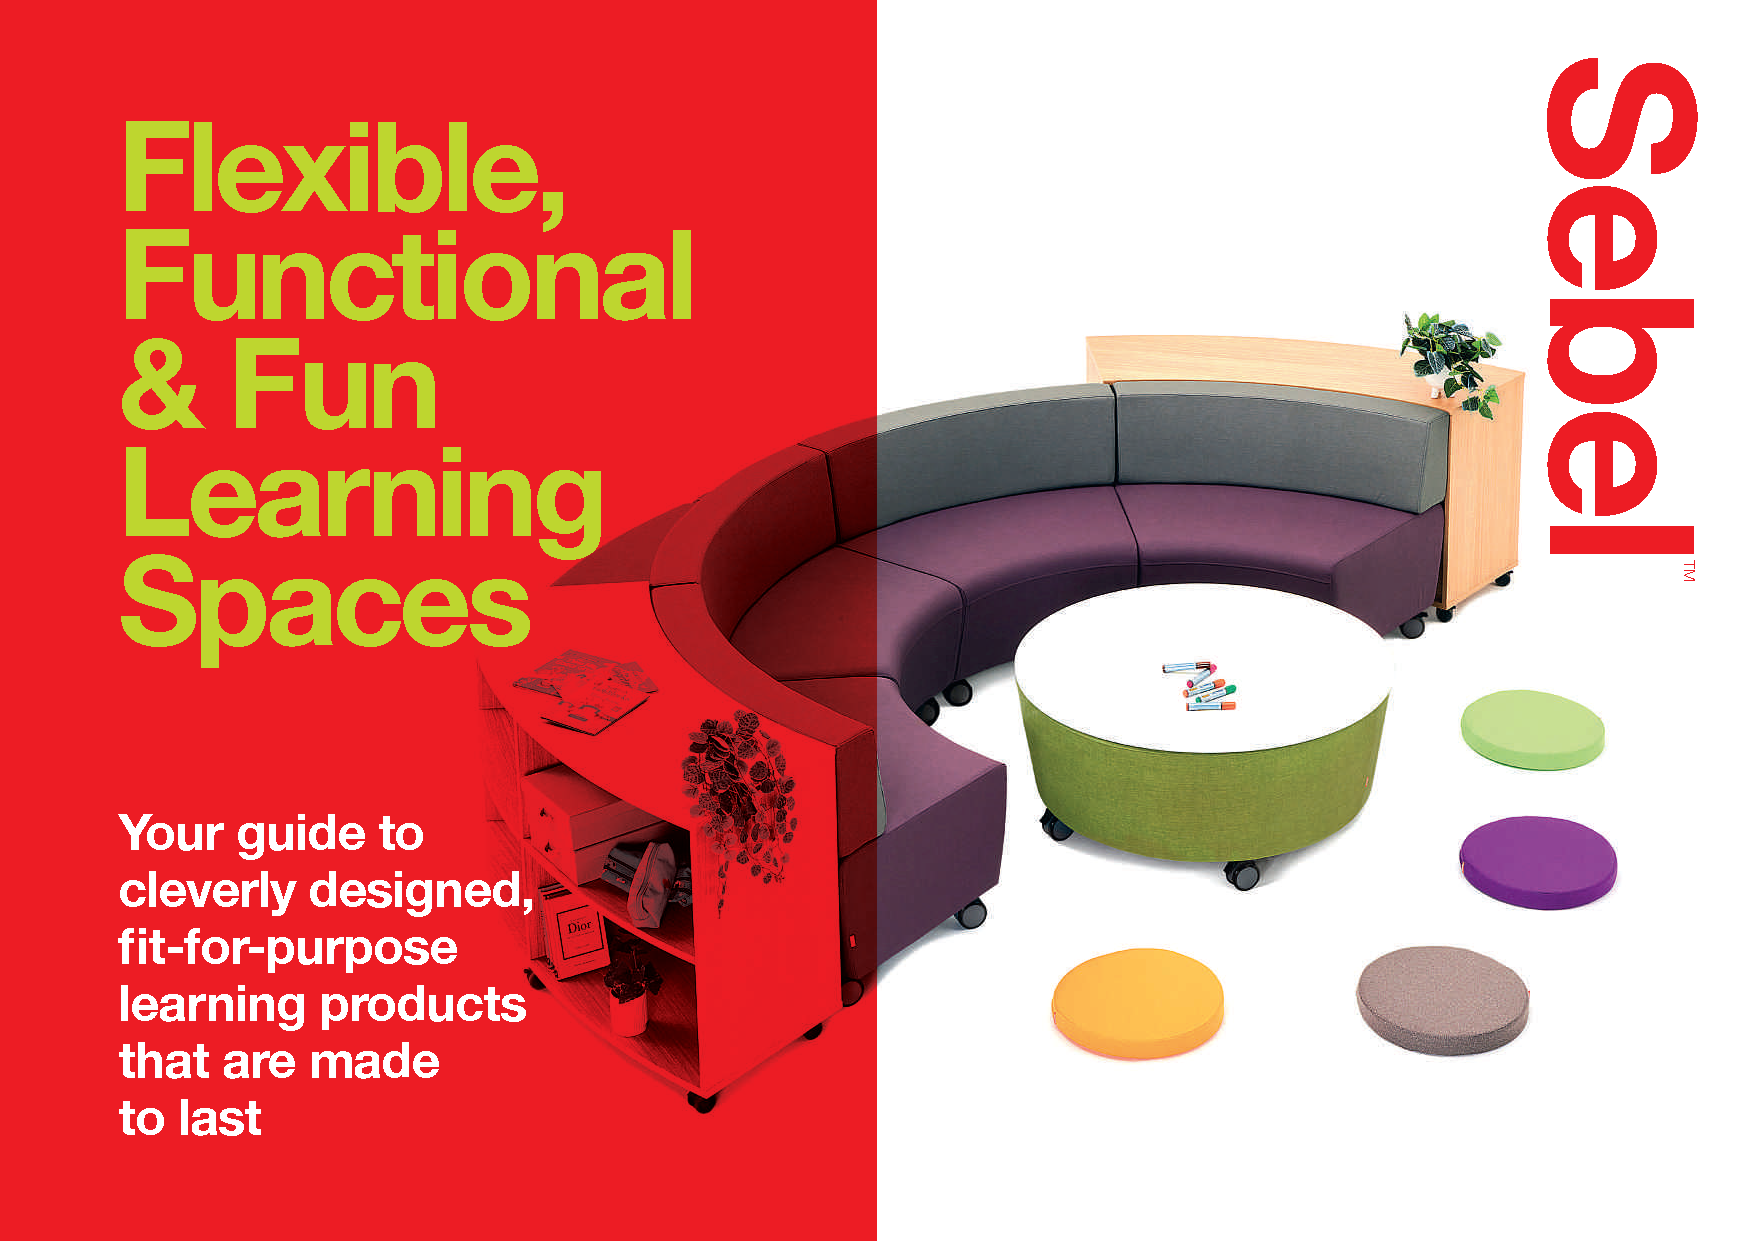 Flexible, Functional & Fun Learning Spaces